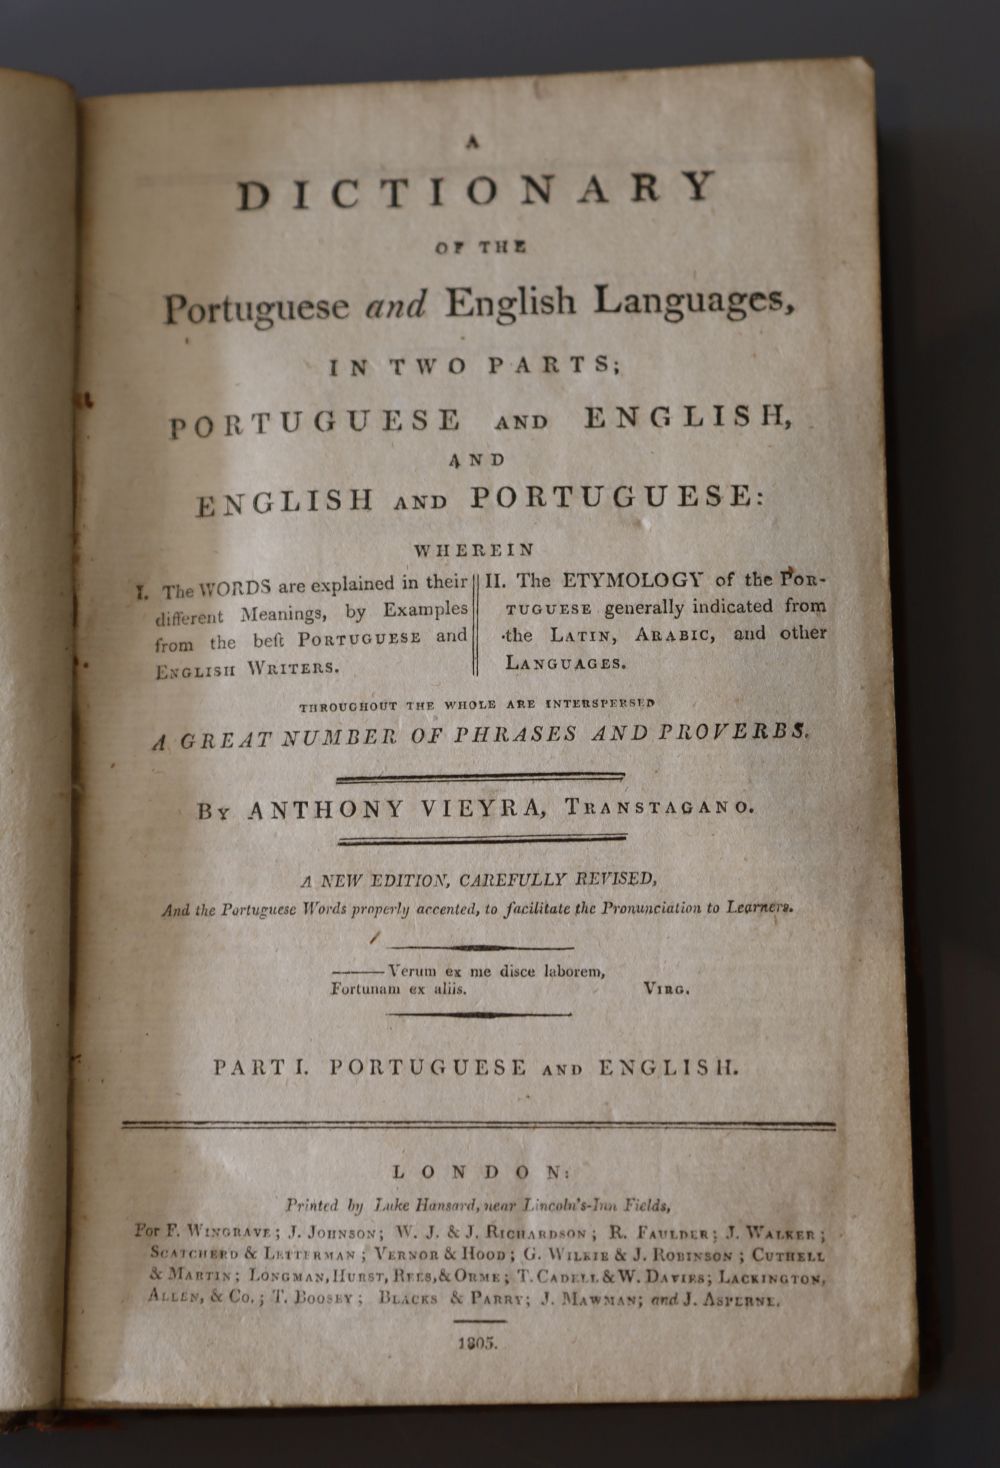 Vieyra, Anthony - Dictionary of the Portuguese and English languages, calf, 8vo, lacking titling label, bookplate of Alexander Thomson